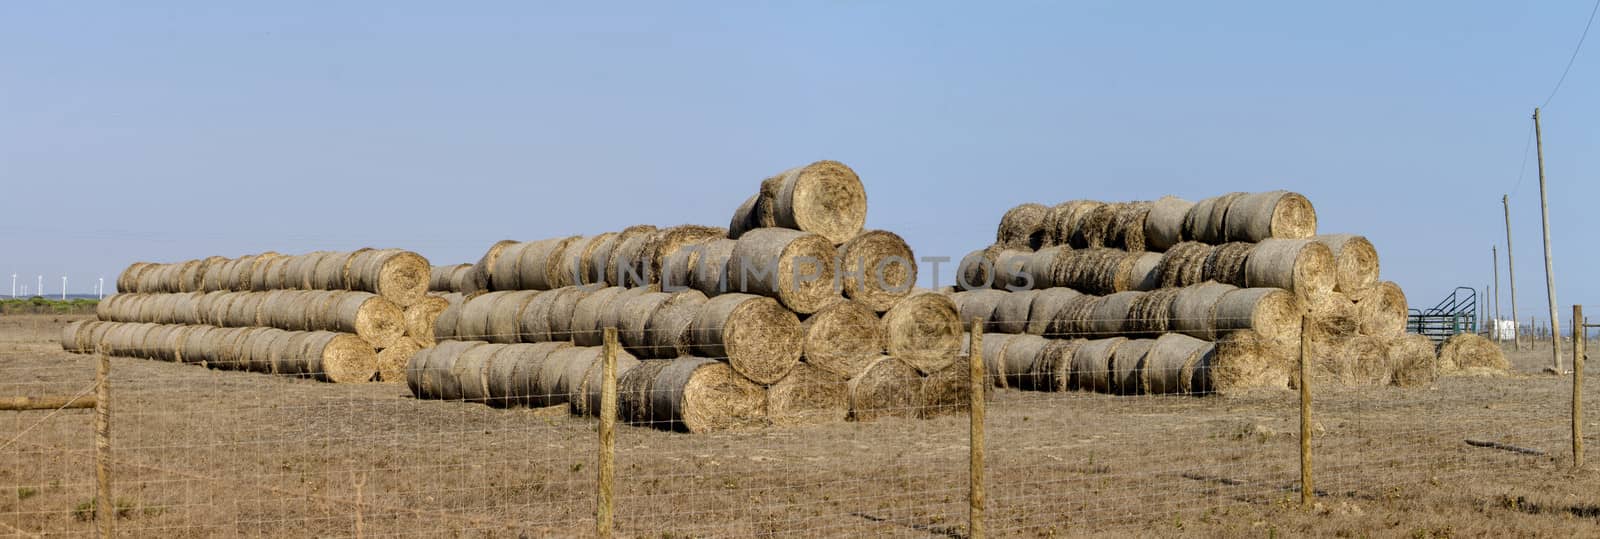 stack of hay bales by membio